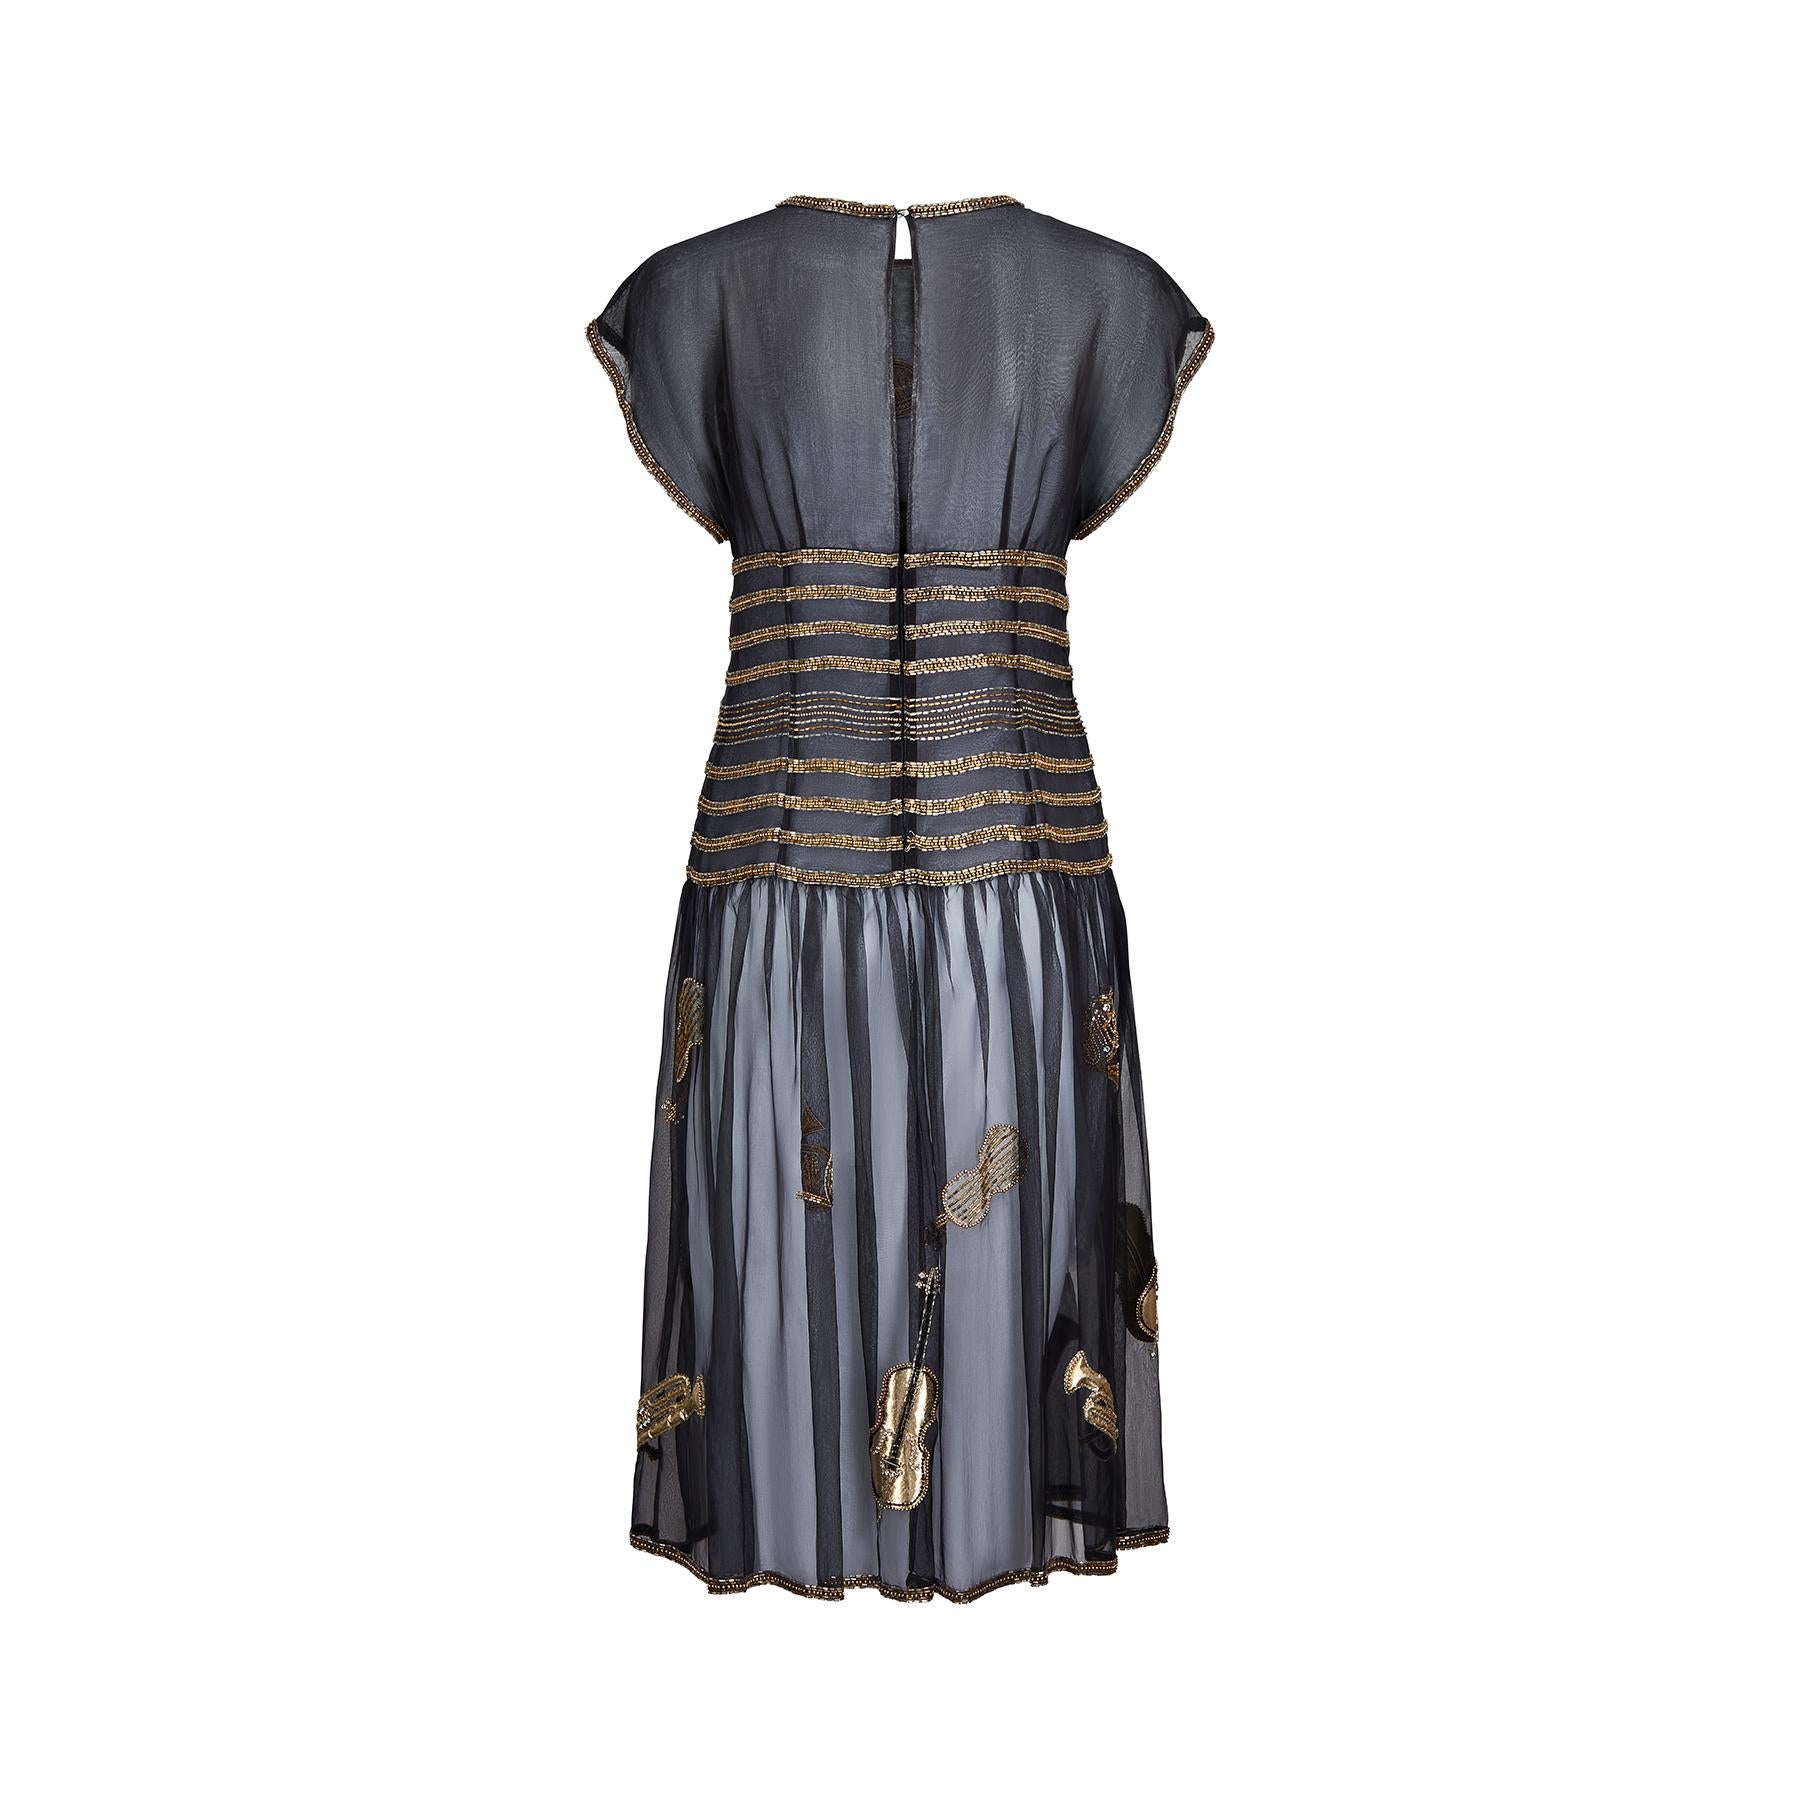 1983 Runway Chloe Novelty Musical Instrument Dress In Excellent Condition For Sale In London, GB